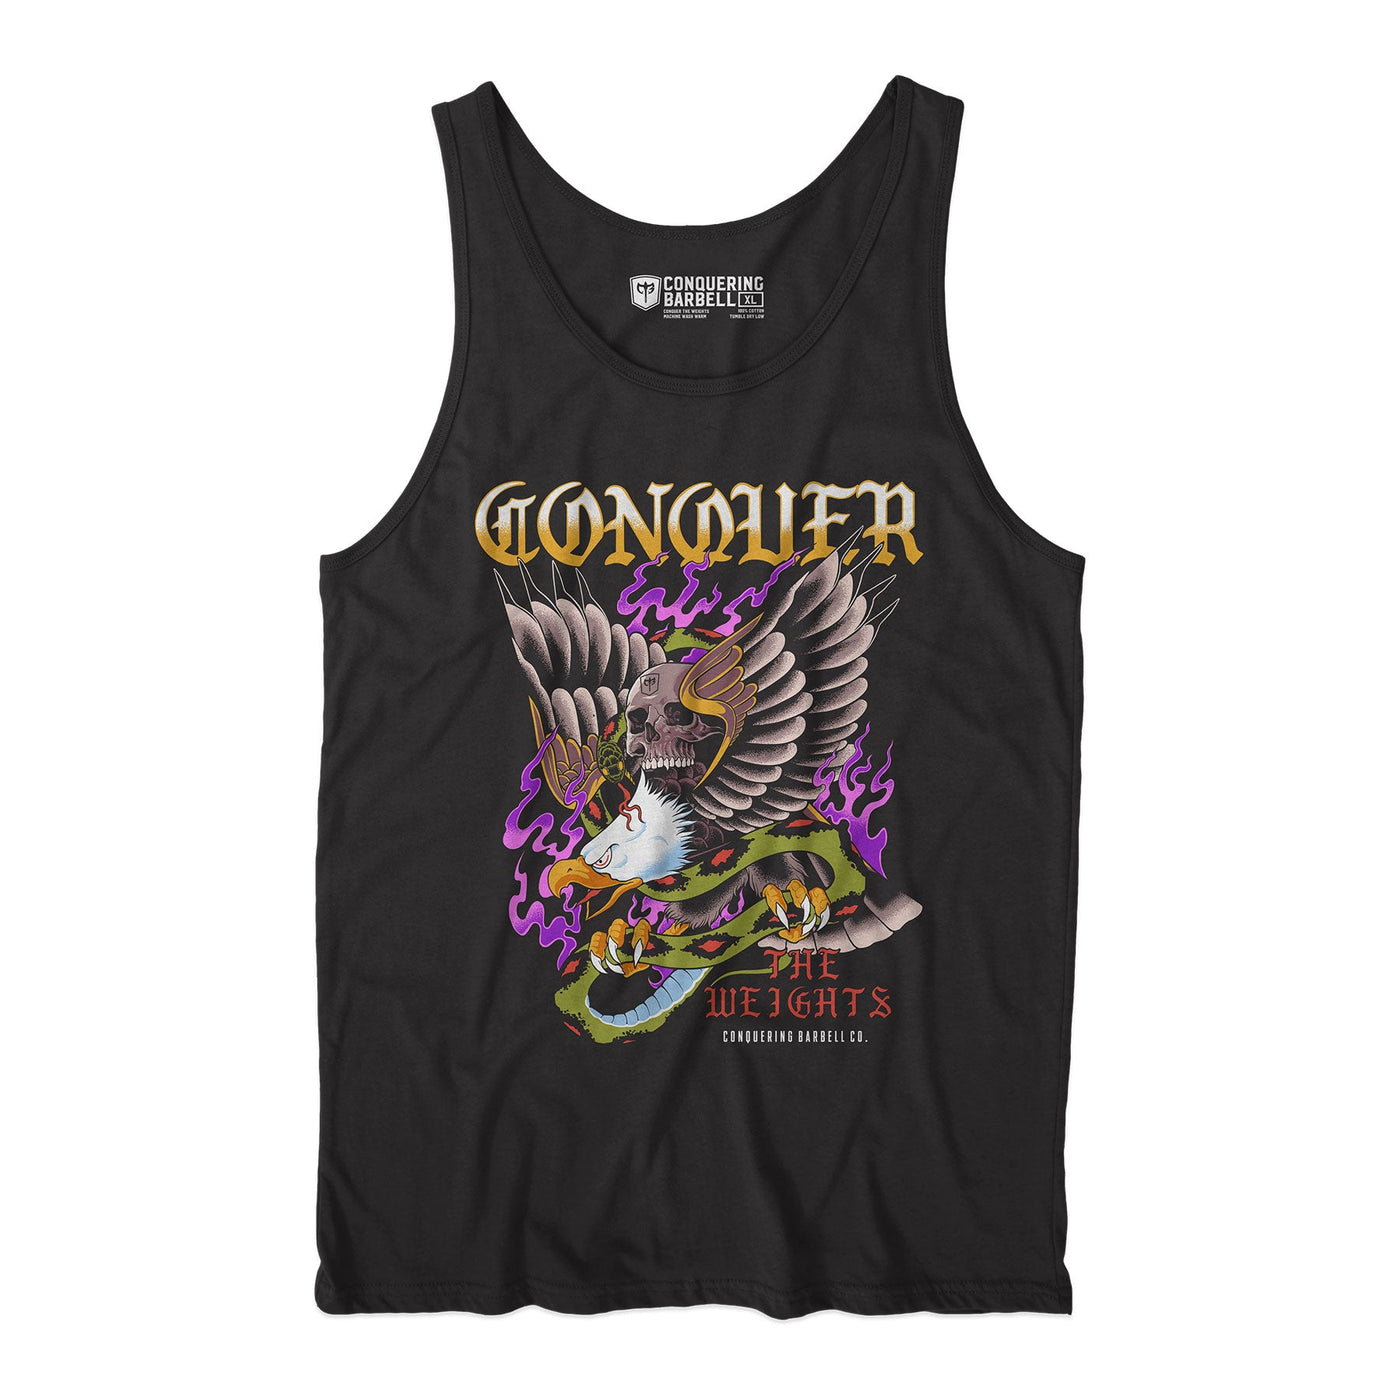 Conquer the Weights - Eagle - on Black tank top